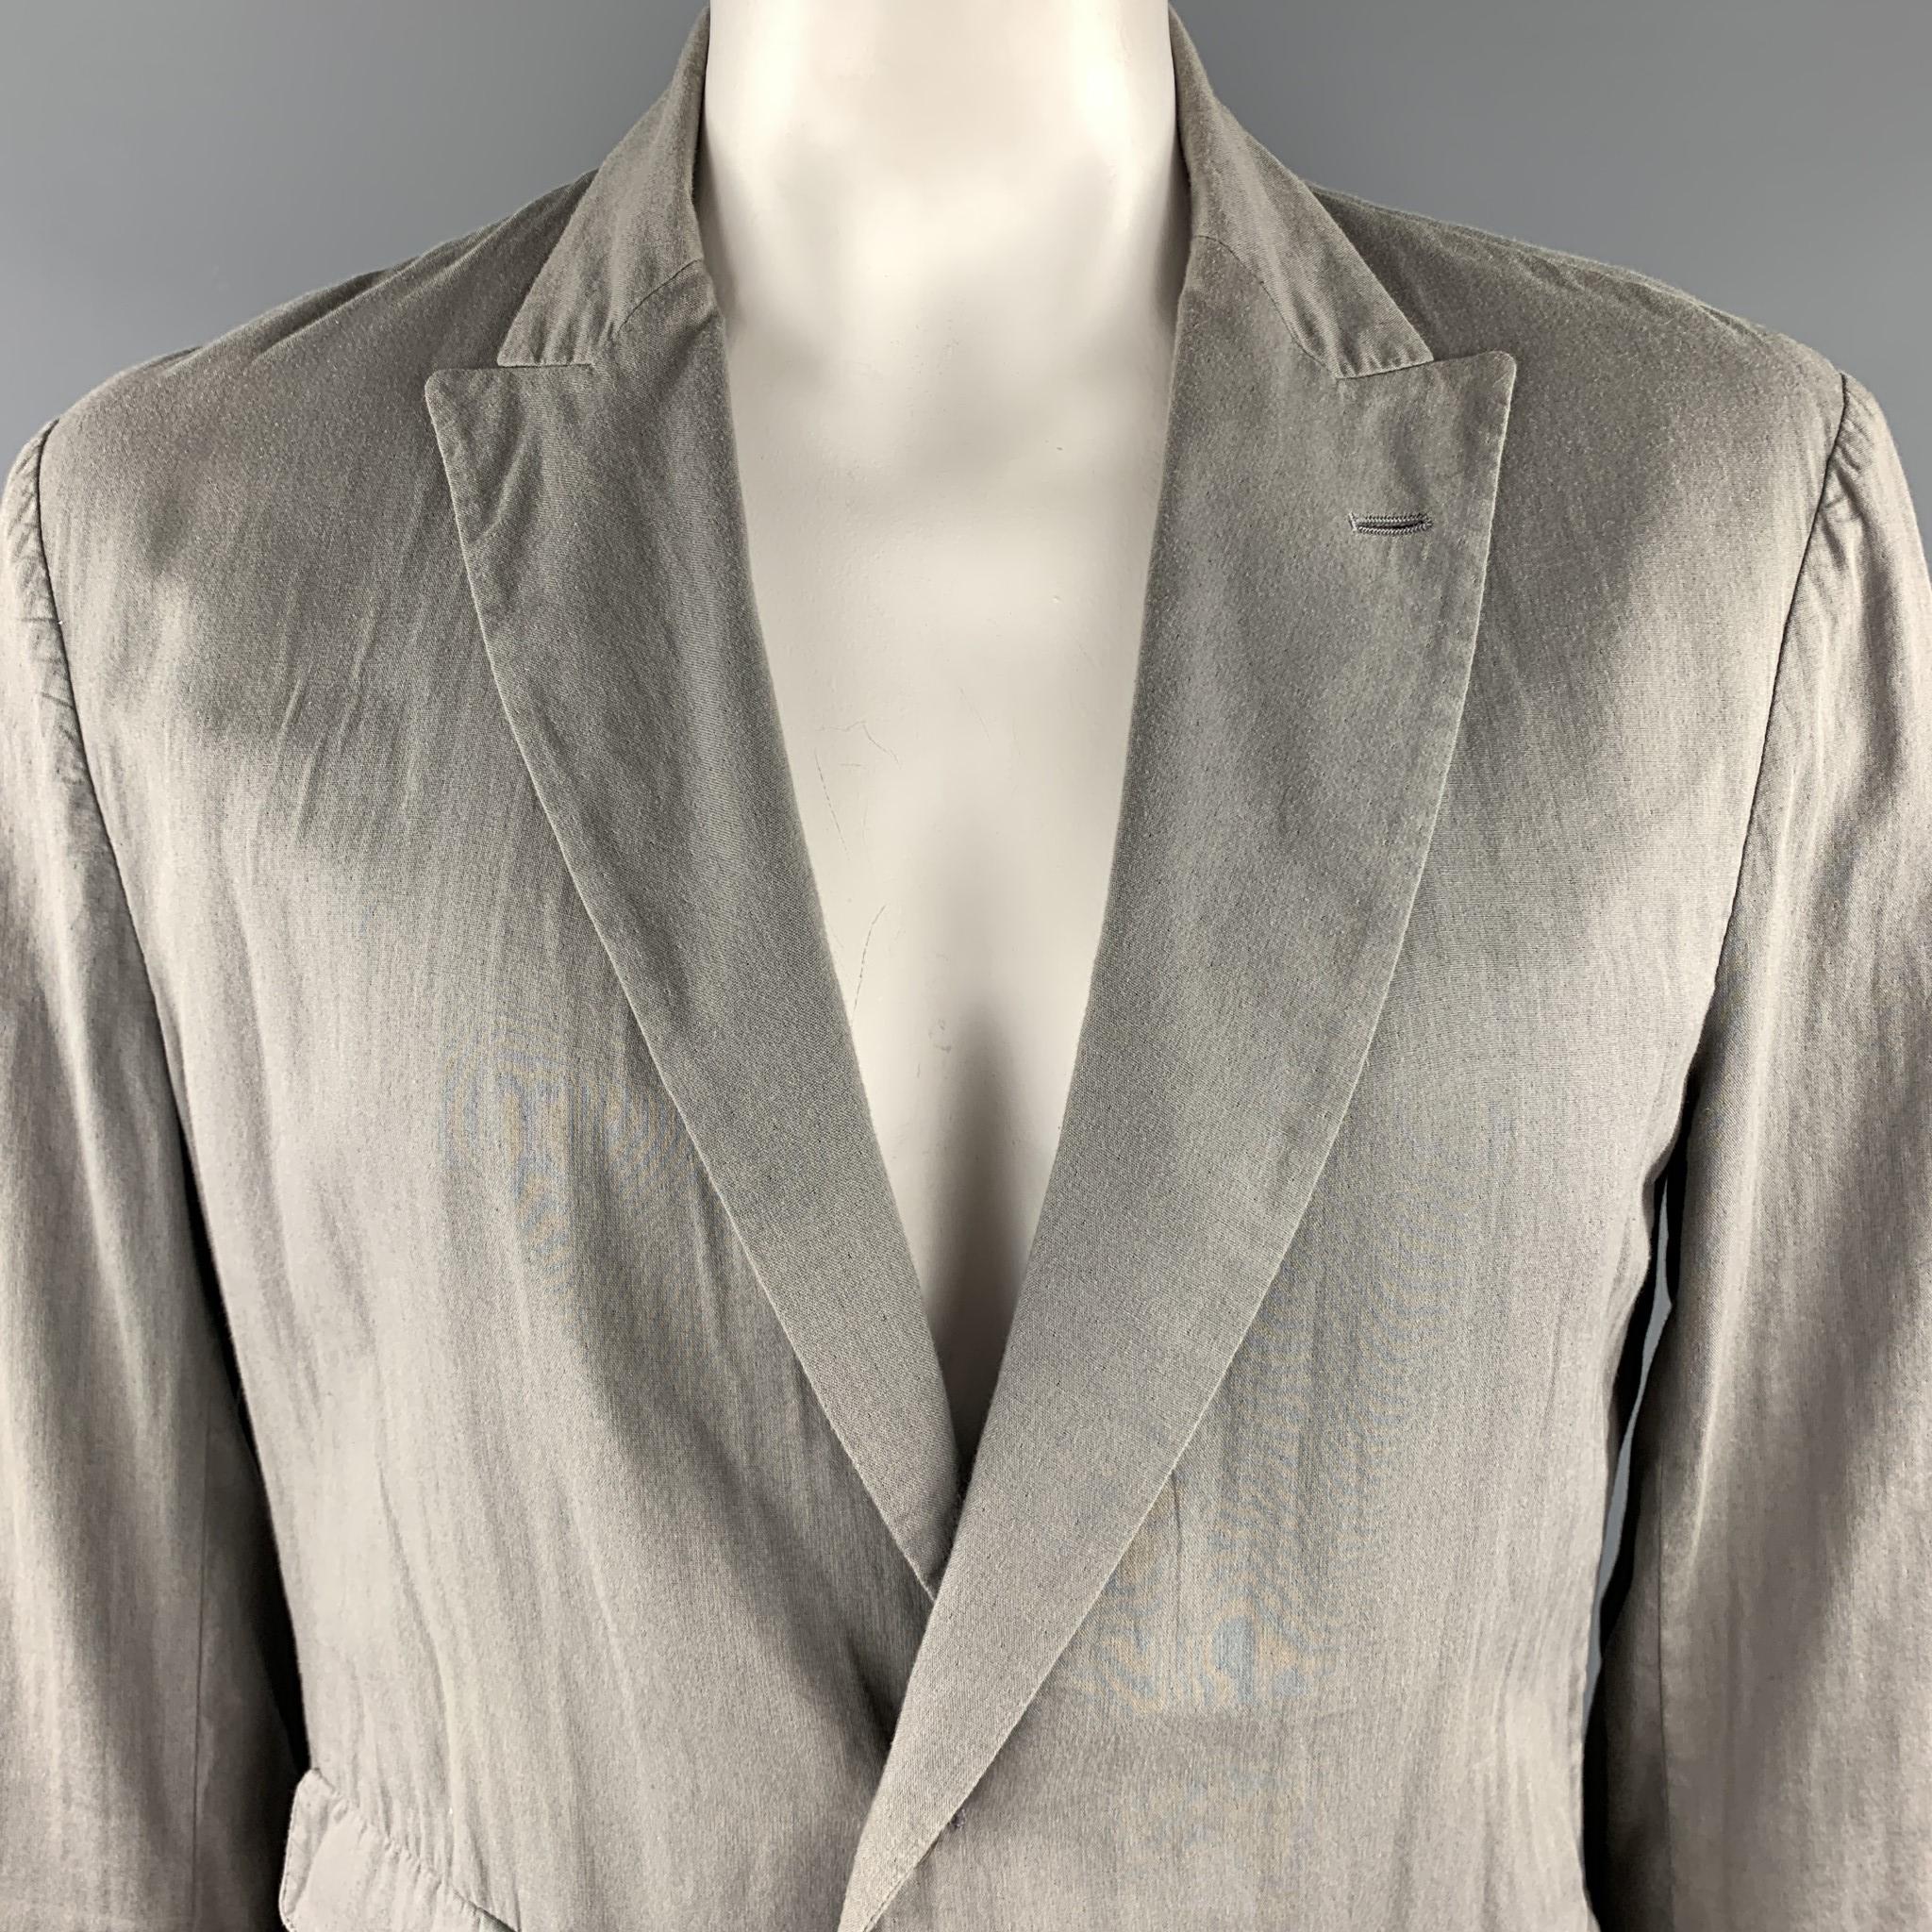 ADAM KIMMEL sport coat comes in soft grey unpressed cotton with a peak lapel, single breasted, two button front, and triple flap pockets. Made in Italy.

Very Good Pre-Owned Condition. 
Marked: XL

Measurements:

Shoulder: 19 in.
Chest: 48